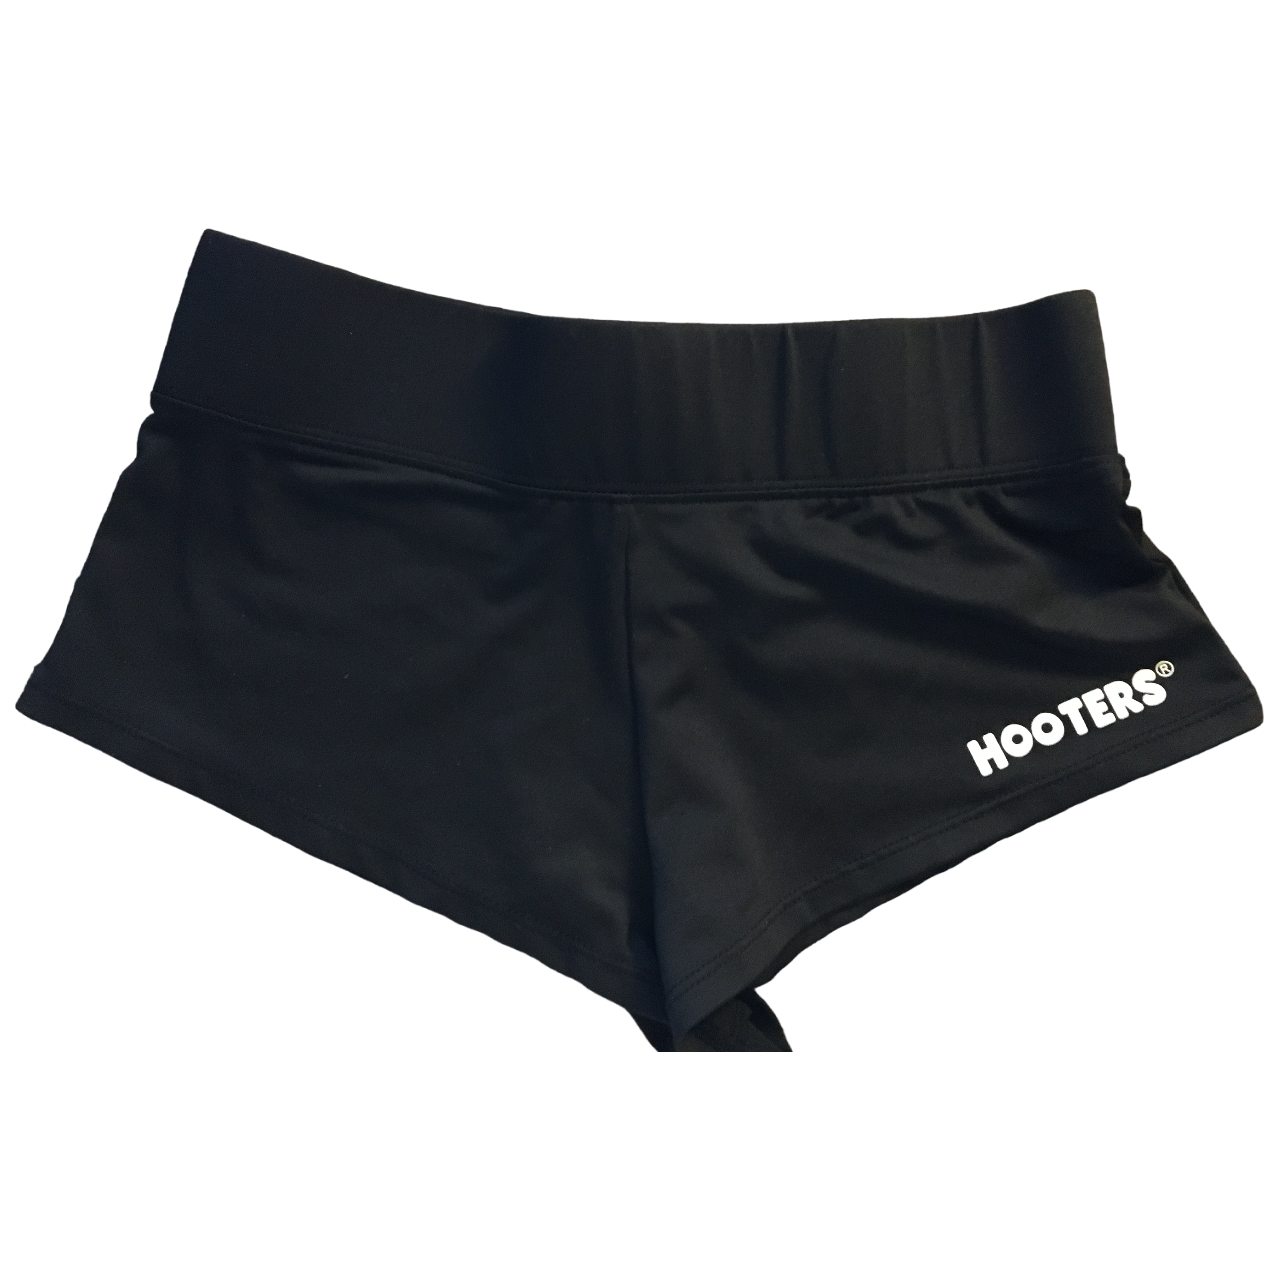 Hooters New Women's Uniform Outfit Costume Cheeky Black Shorts